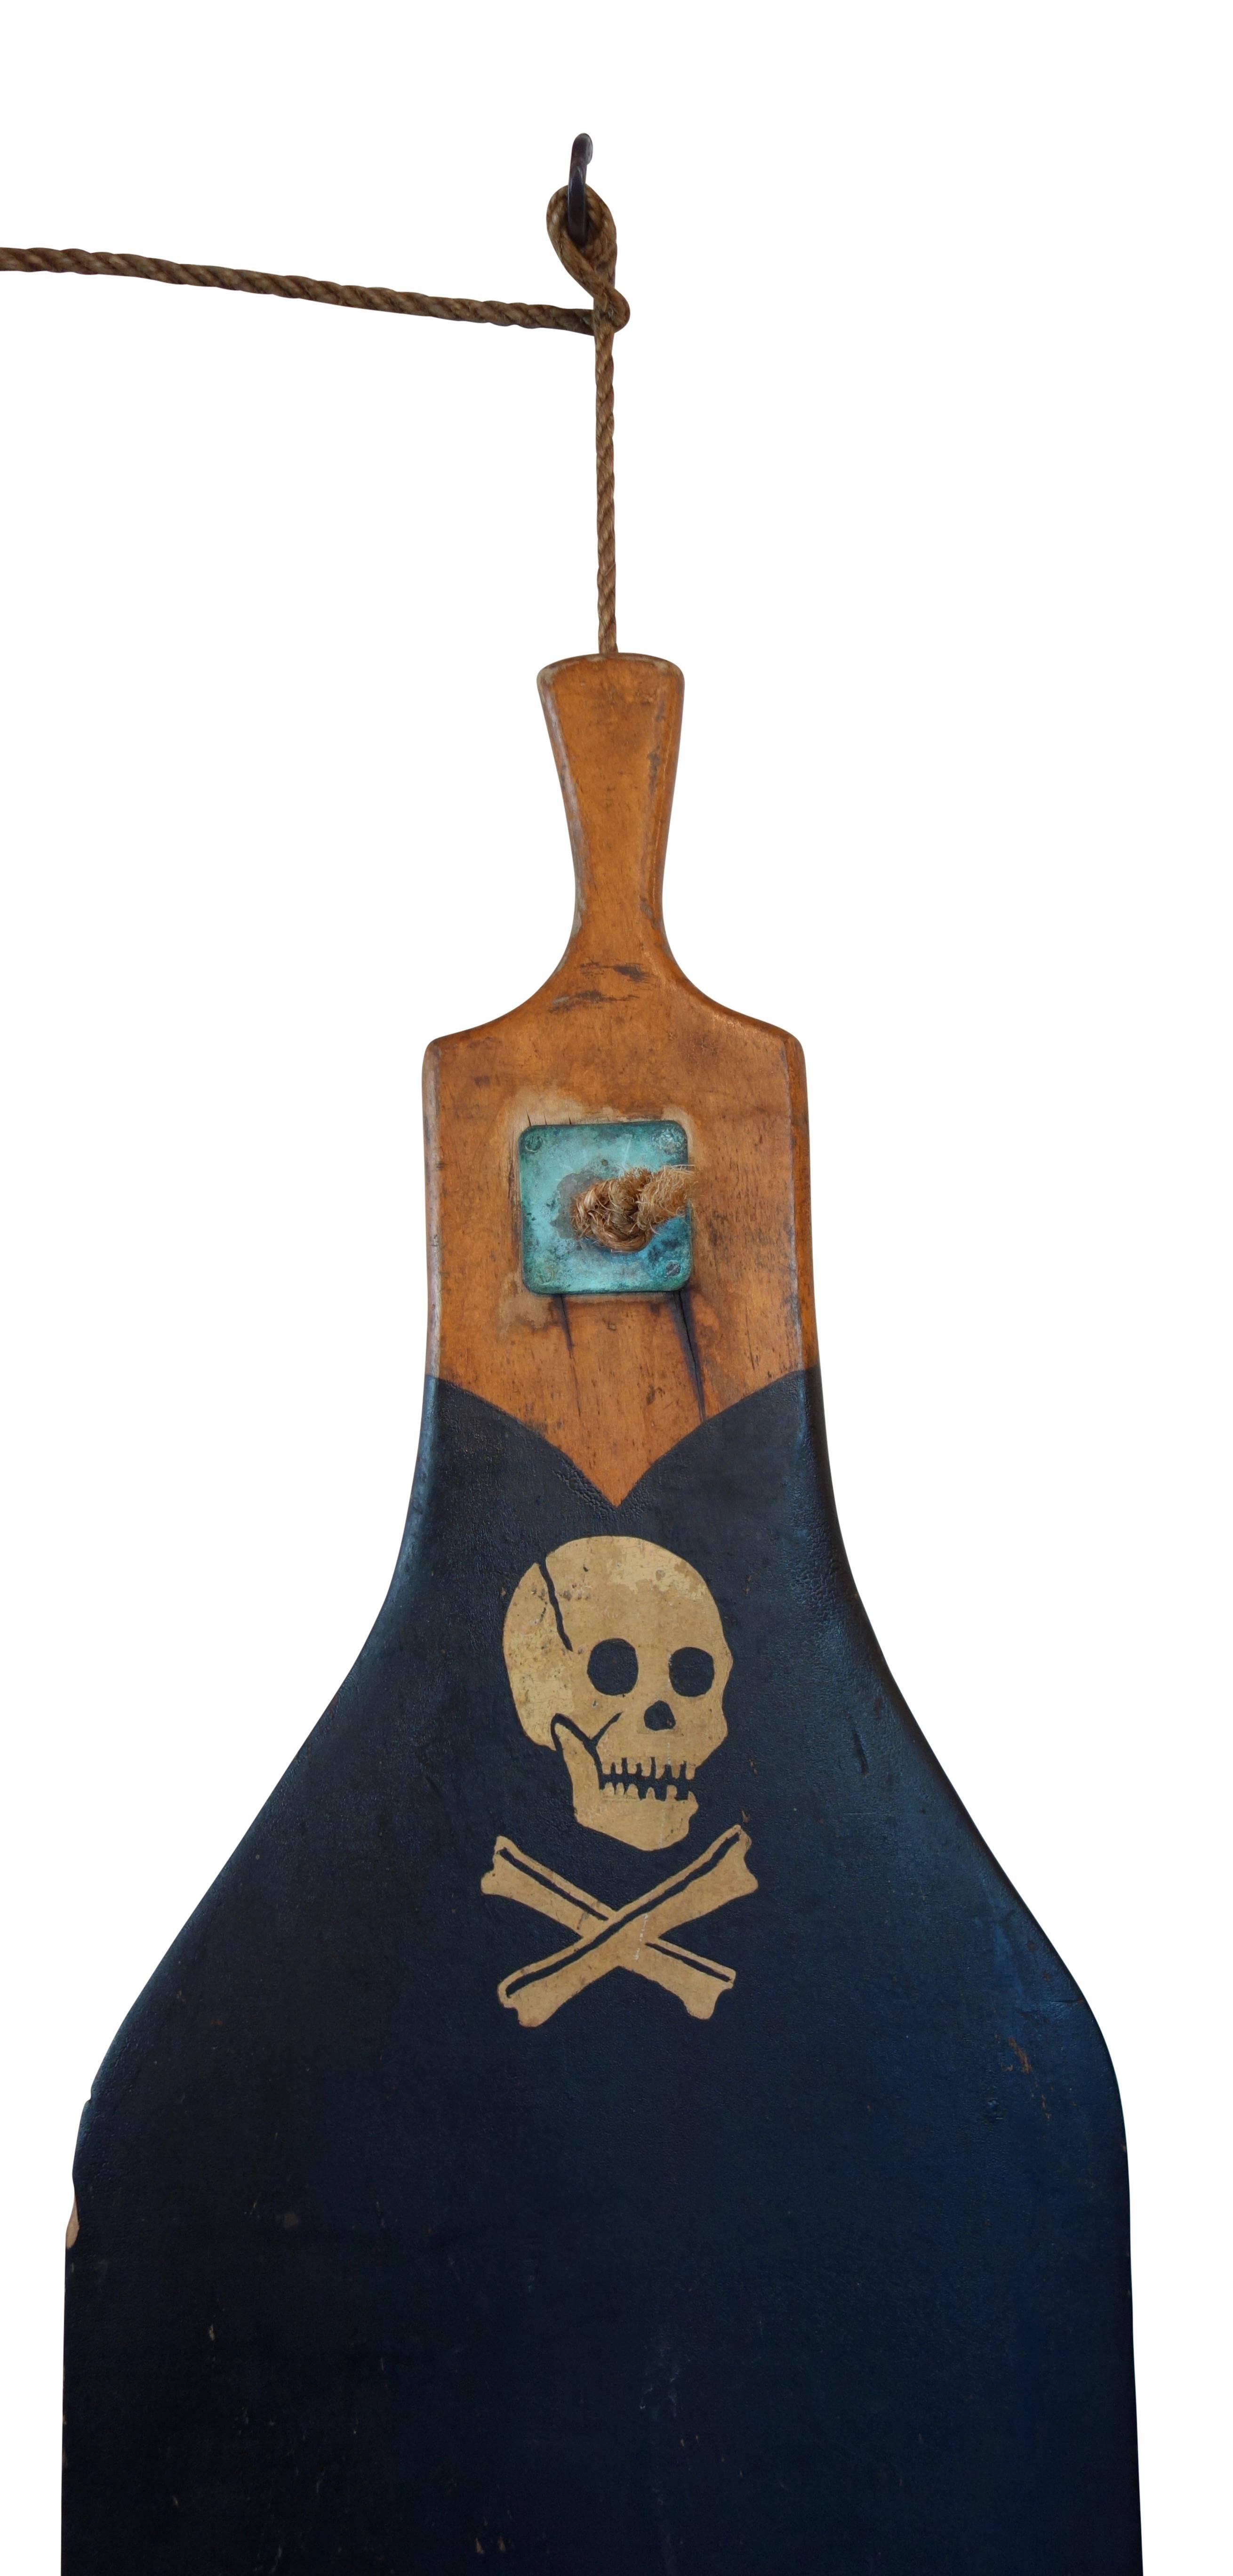 American Pair of Boat Rudders with Hand-Painted Skull and Crossbones, circa 1930